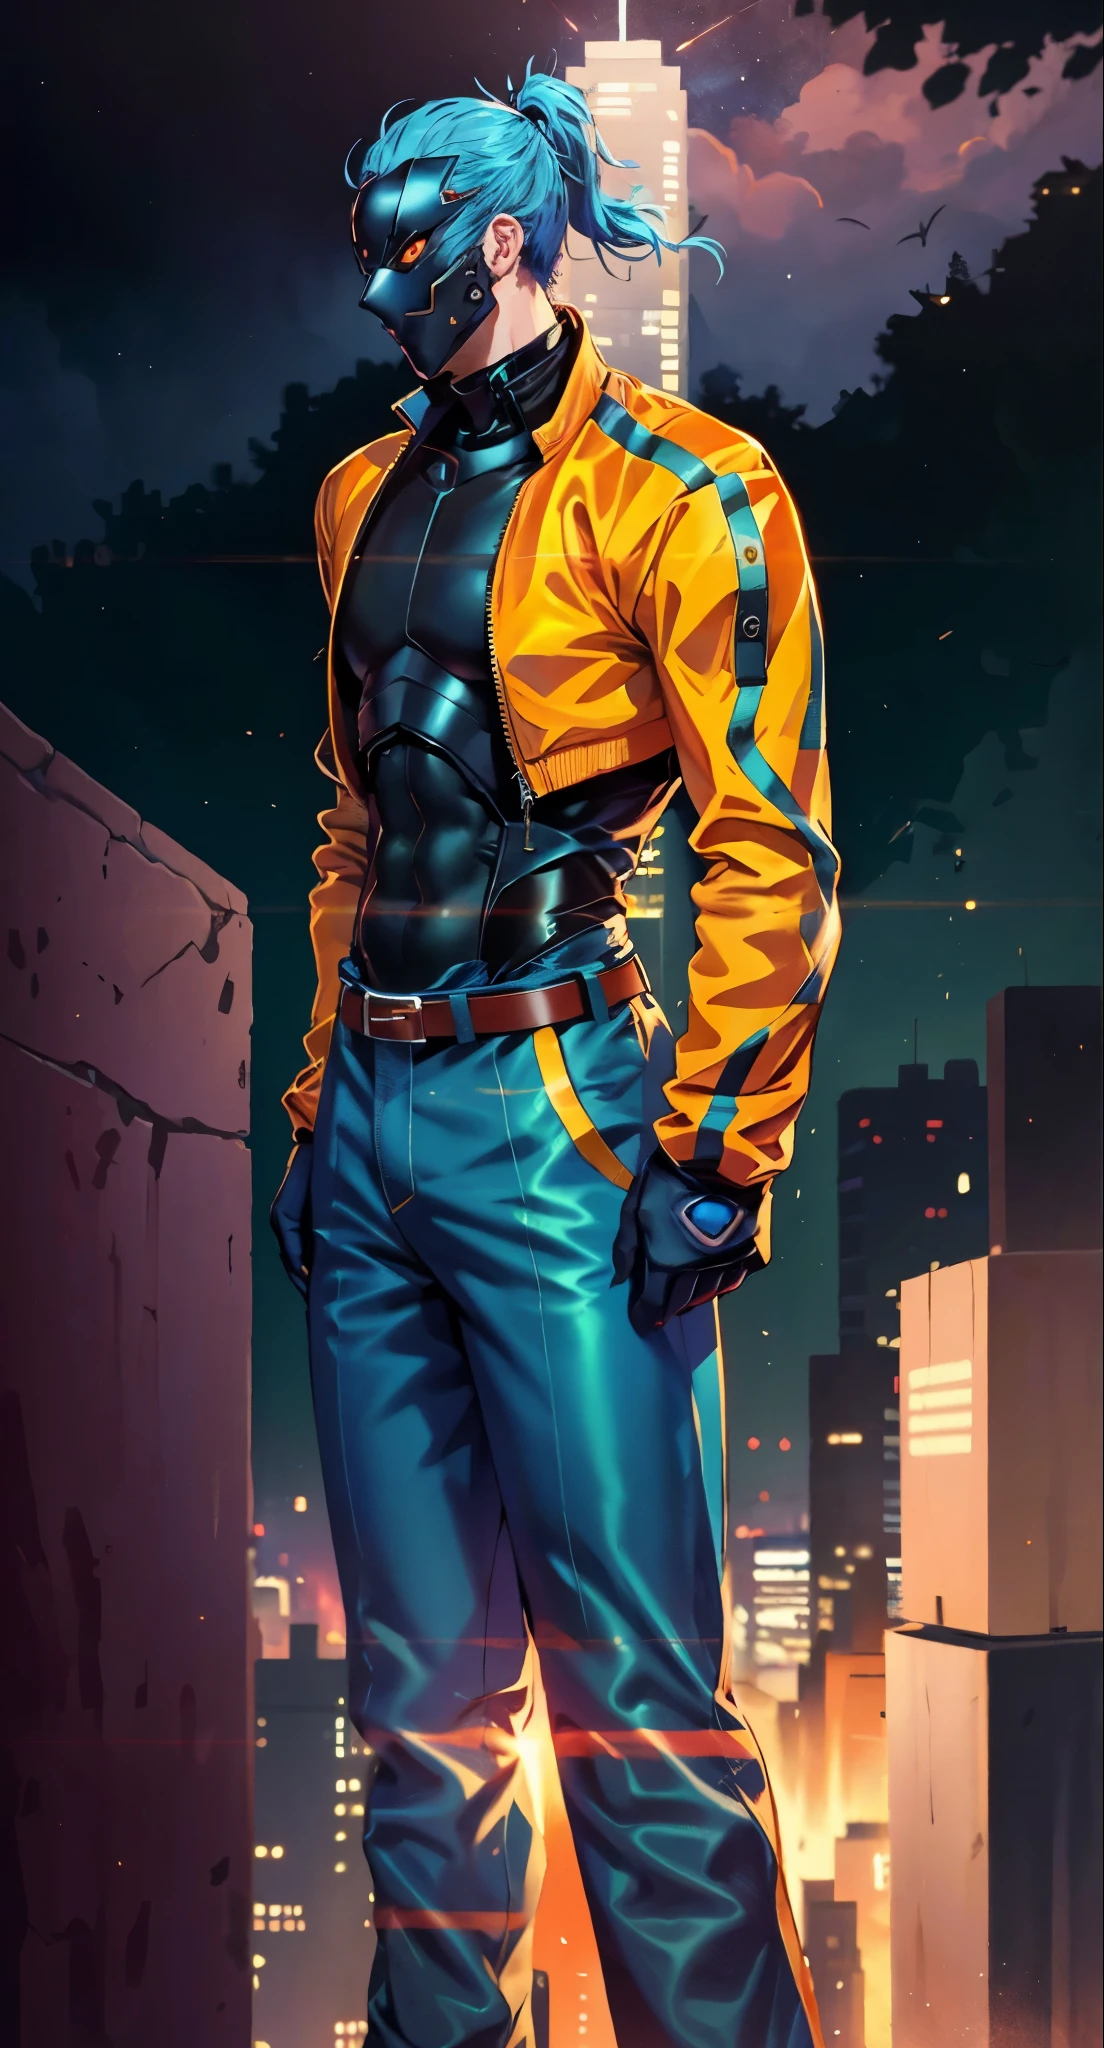 A man with blue hair tied in a ponytail, his face concealed by a falcon concept mask, full_mask, stands tall and imposing, a futuristic sci-fi style short jacket, a dark bodysuit, matching trousers, a belt cinched at the waist, colorful gloves, he stands atop a futuristic high-rise, he surveys the city night view, this character embodies a finely crafted futuristic sci-fi style masked hero in anime style, exquisite and mature manga art style, high definition, best quality, highres, ultra-detailed, ultra-fine painting, extremely delicate, professional, perfect body proportions, golden ratio, anatomically correct, symmetrical face, extremely detailed eyes and face, high quality eyes, creativity, RAW photo, UHD, 32k, Natural light, cinematic lighting, masterpiece-anatomy-perfect, masterpiece:1.5